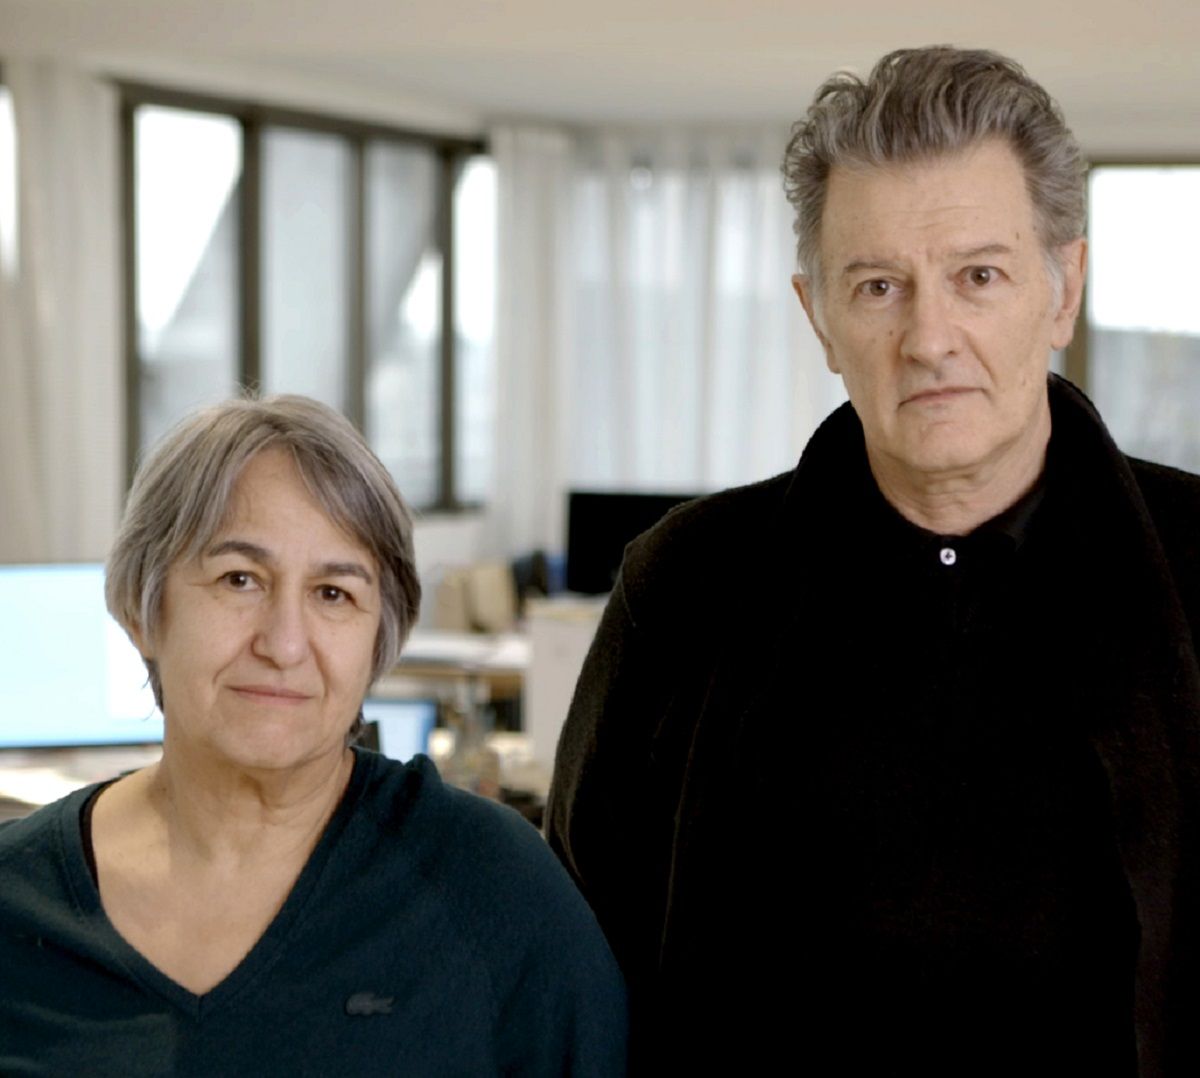 Anne Lacaton and Jean Philippe Vassal Photo courtesy of Laurent Chalet 1